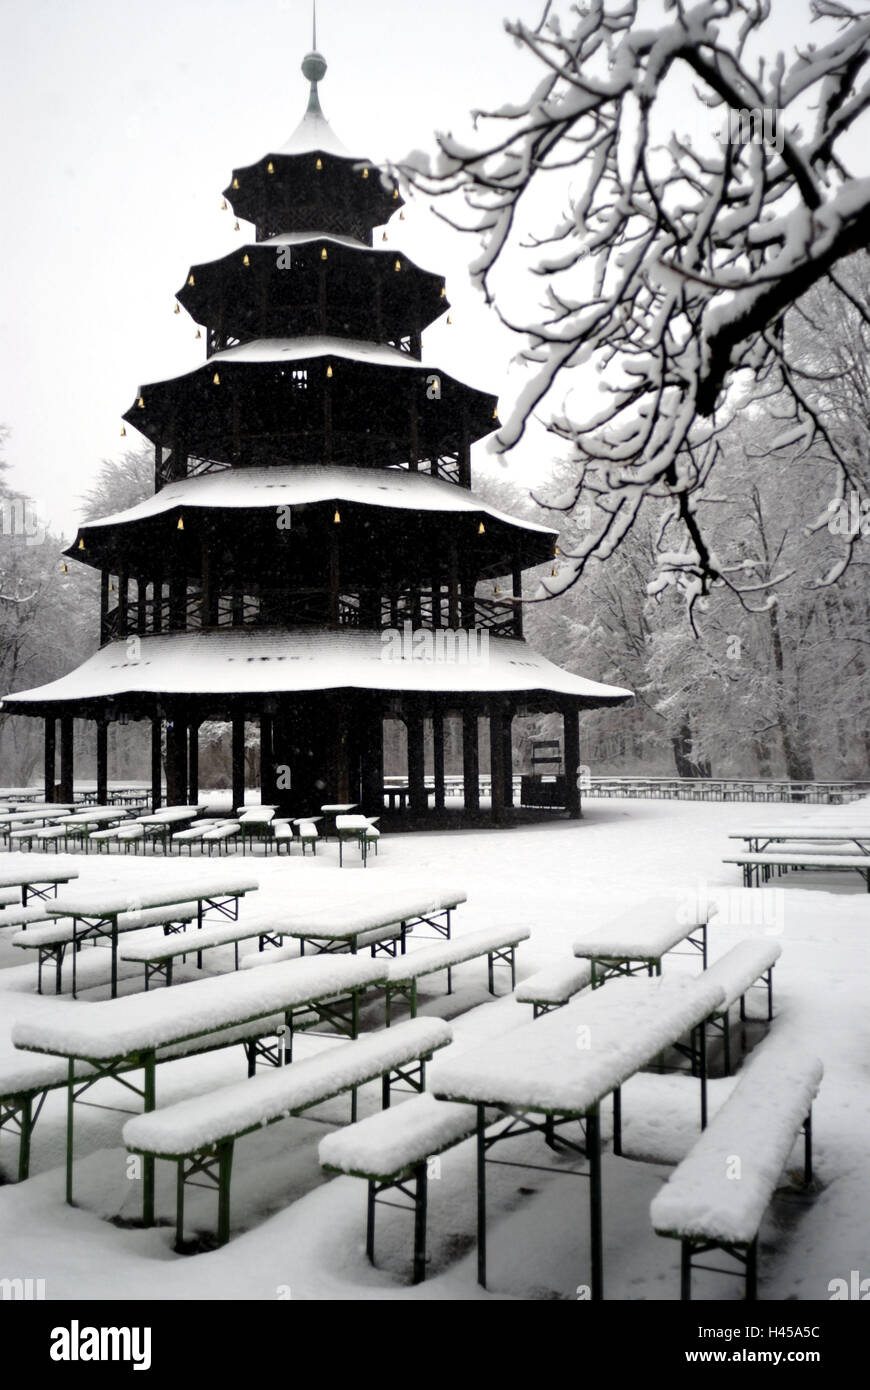 Germany, Munich, English garden, Chinese tower, beer garden, winter, Bavaria, Upper Bavaria, Schwabing, scenery park, scenery garden, town park, local recreational area, park, building, pagoda, gastronomy, uncolored, trees, broad-leaved trees, garden architecture, beer tables, beer benches, tables, benches, snow-covered, seat opportunities, nobody, deserted, snow, winter scenery, dreary, season, silence, loneliness, colour mood black-and-white, Stock Photo